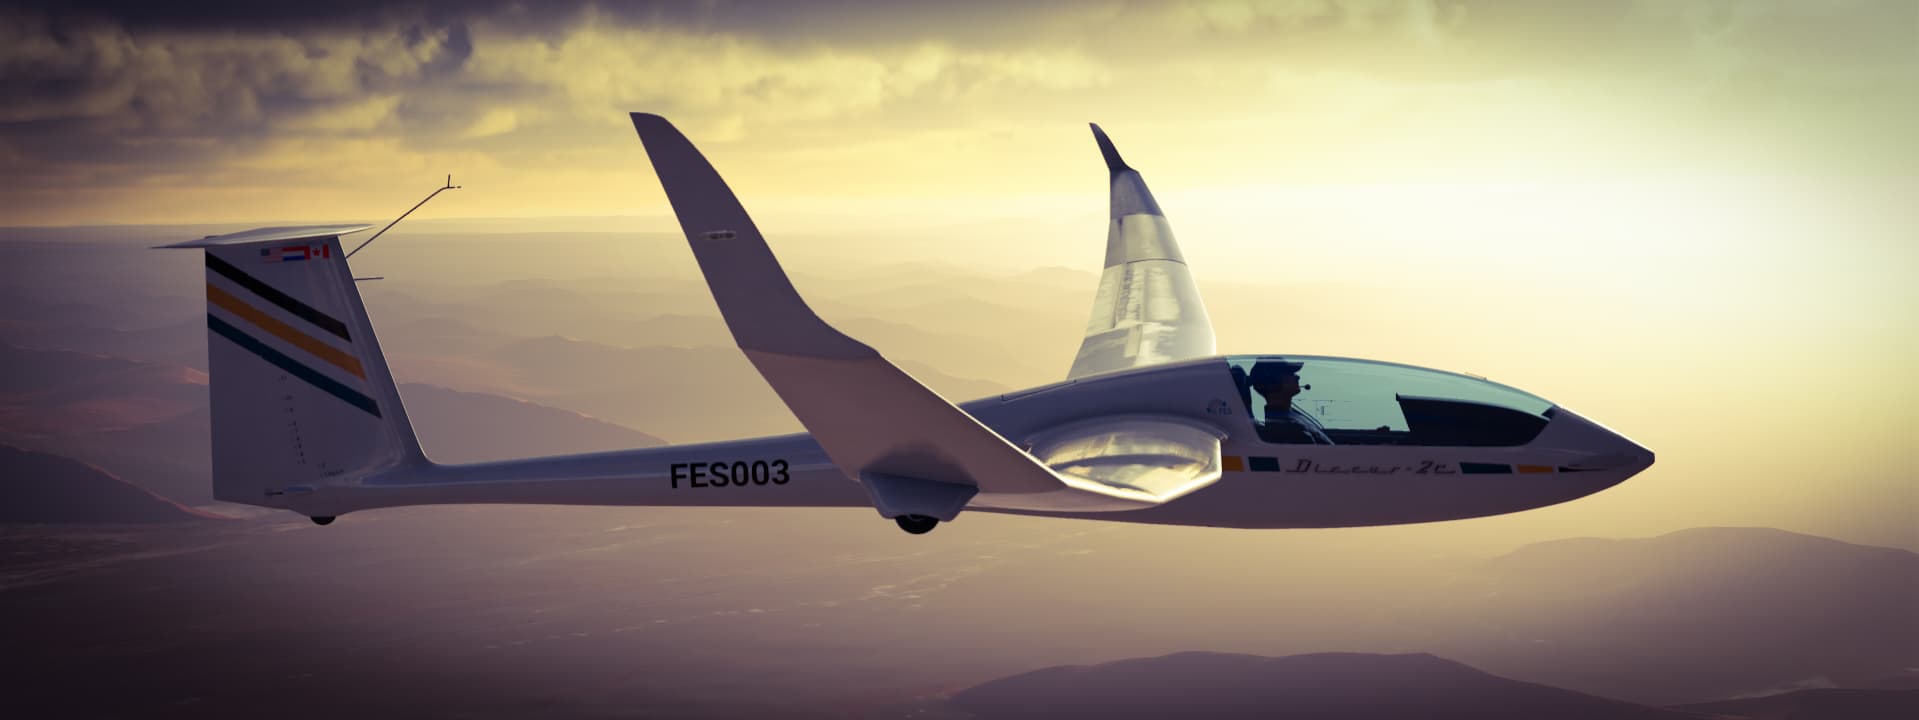 Microsoft Flight Simulator Celebrates Franchise's 40th Anniversary and  Introduces Halo Infinite Pelican as Free Add-On - Xbox Wire